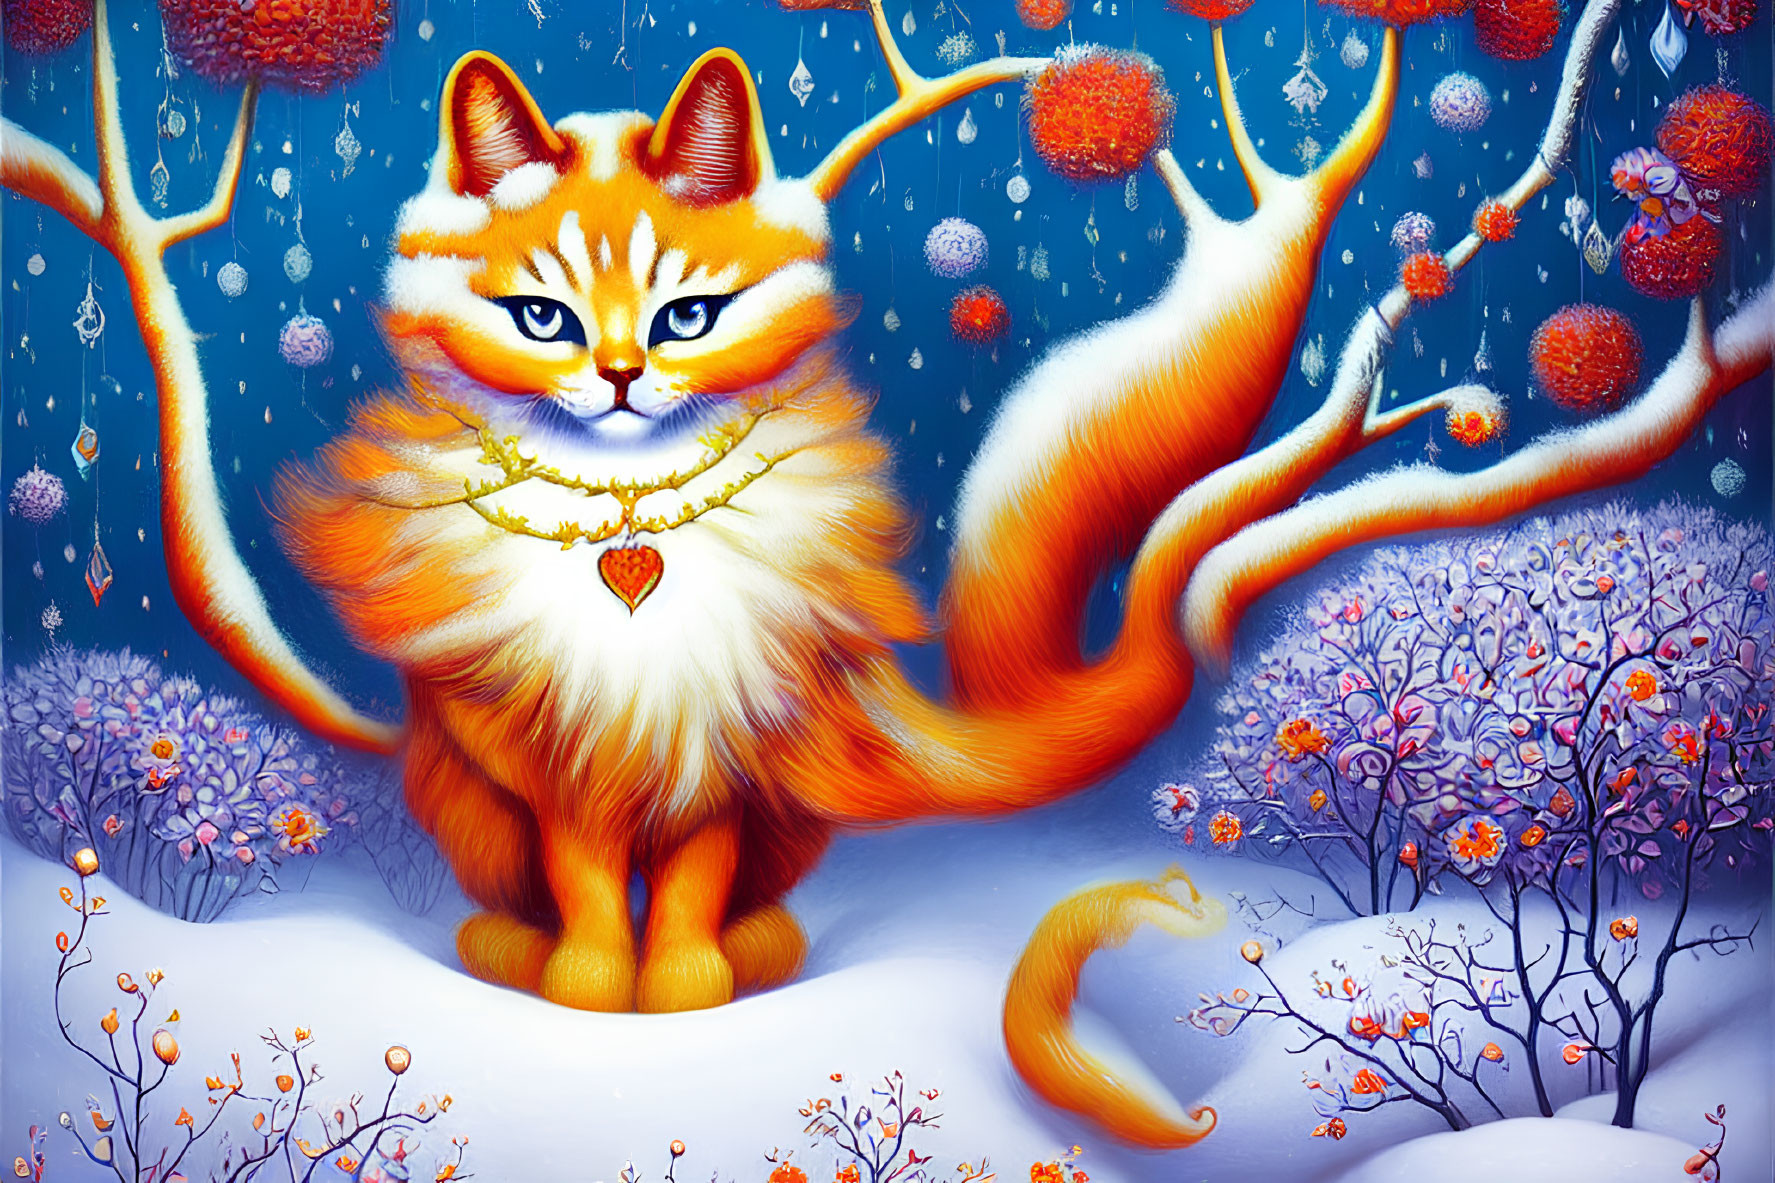 Whimsical orange cat with heart pendant in vibrant snow-covered fantasy forest